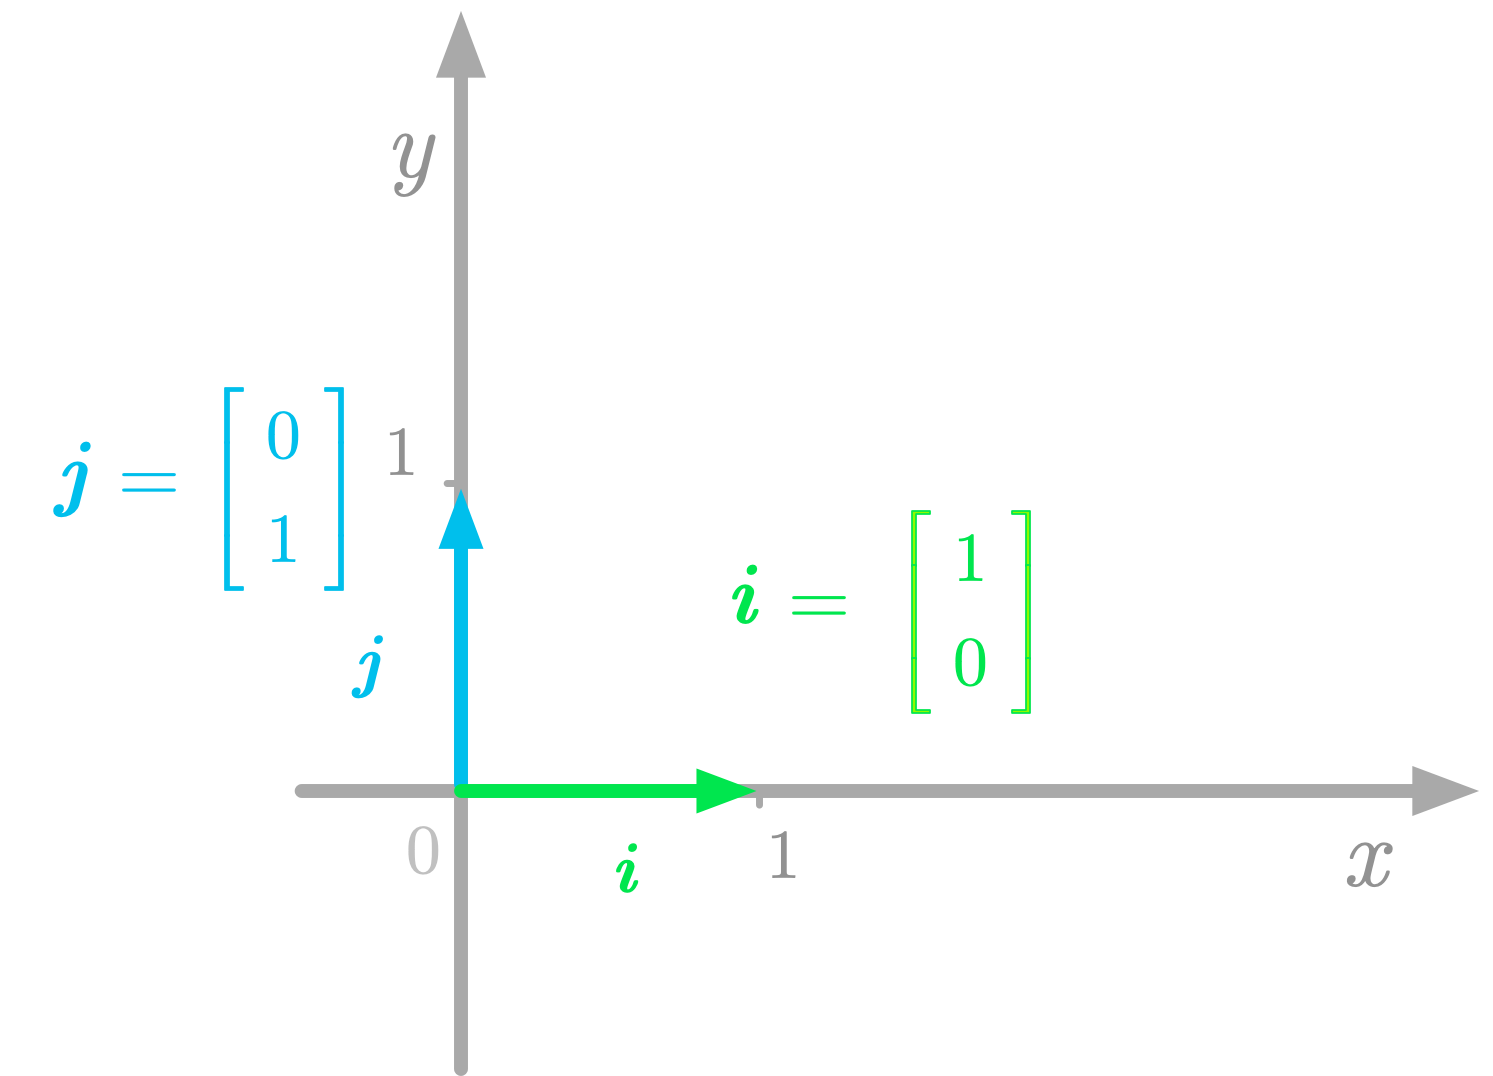 Figure 1: The basis vectors in the Cartesian plane.